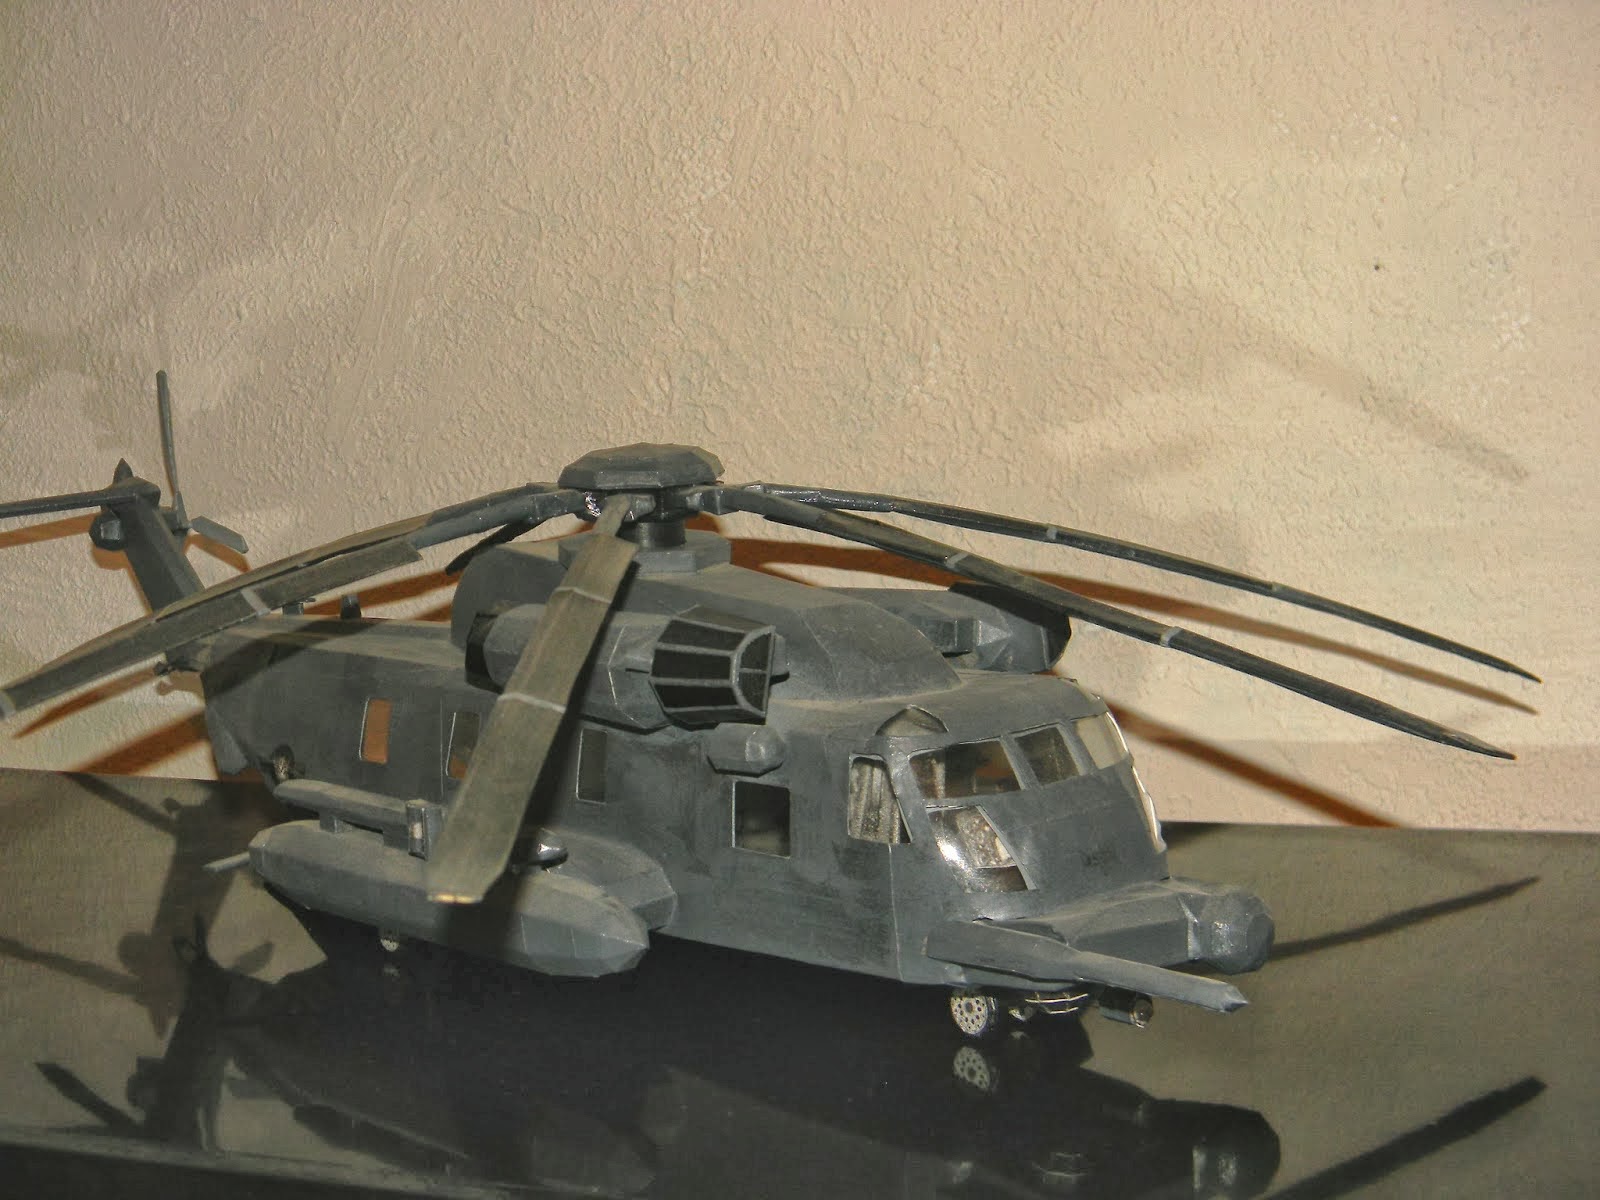 Sikorsky MH53 Pave Low Helicopter Papercraft